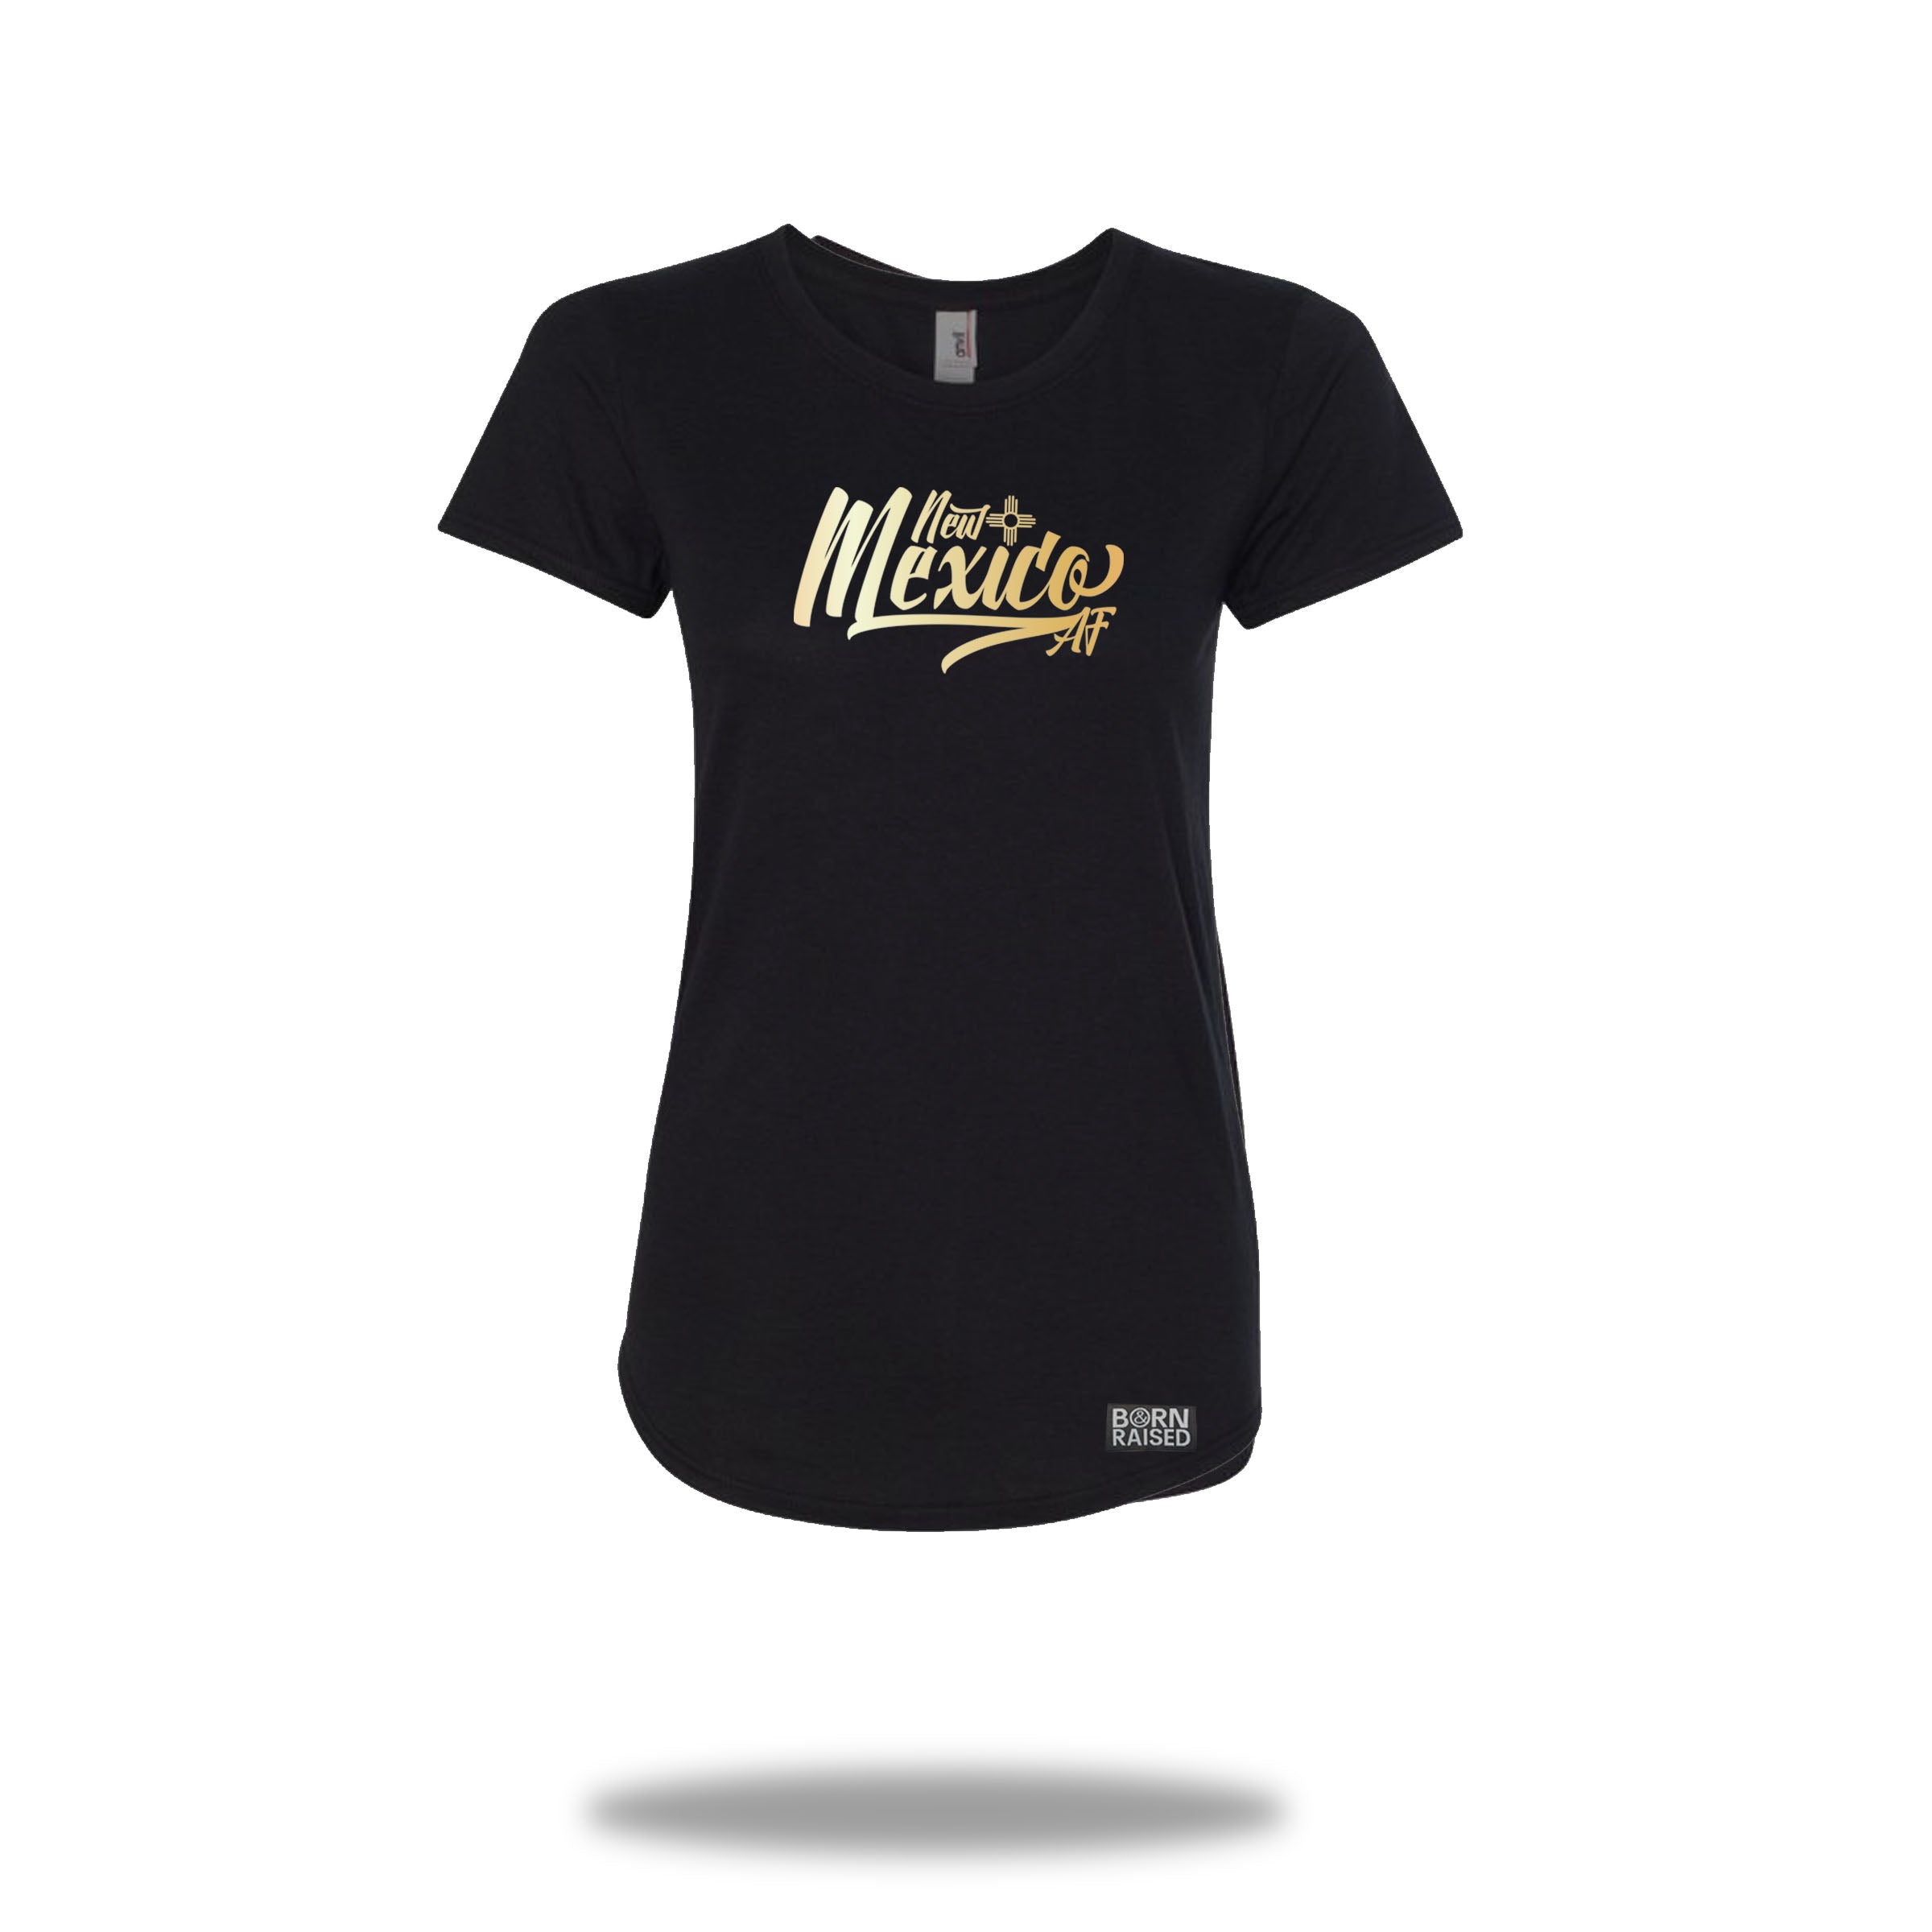 Ladies' New Mexico AF T-Shirt